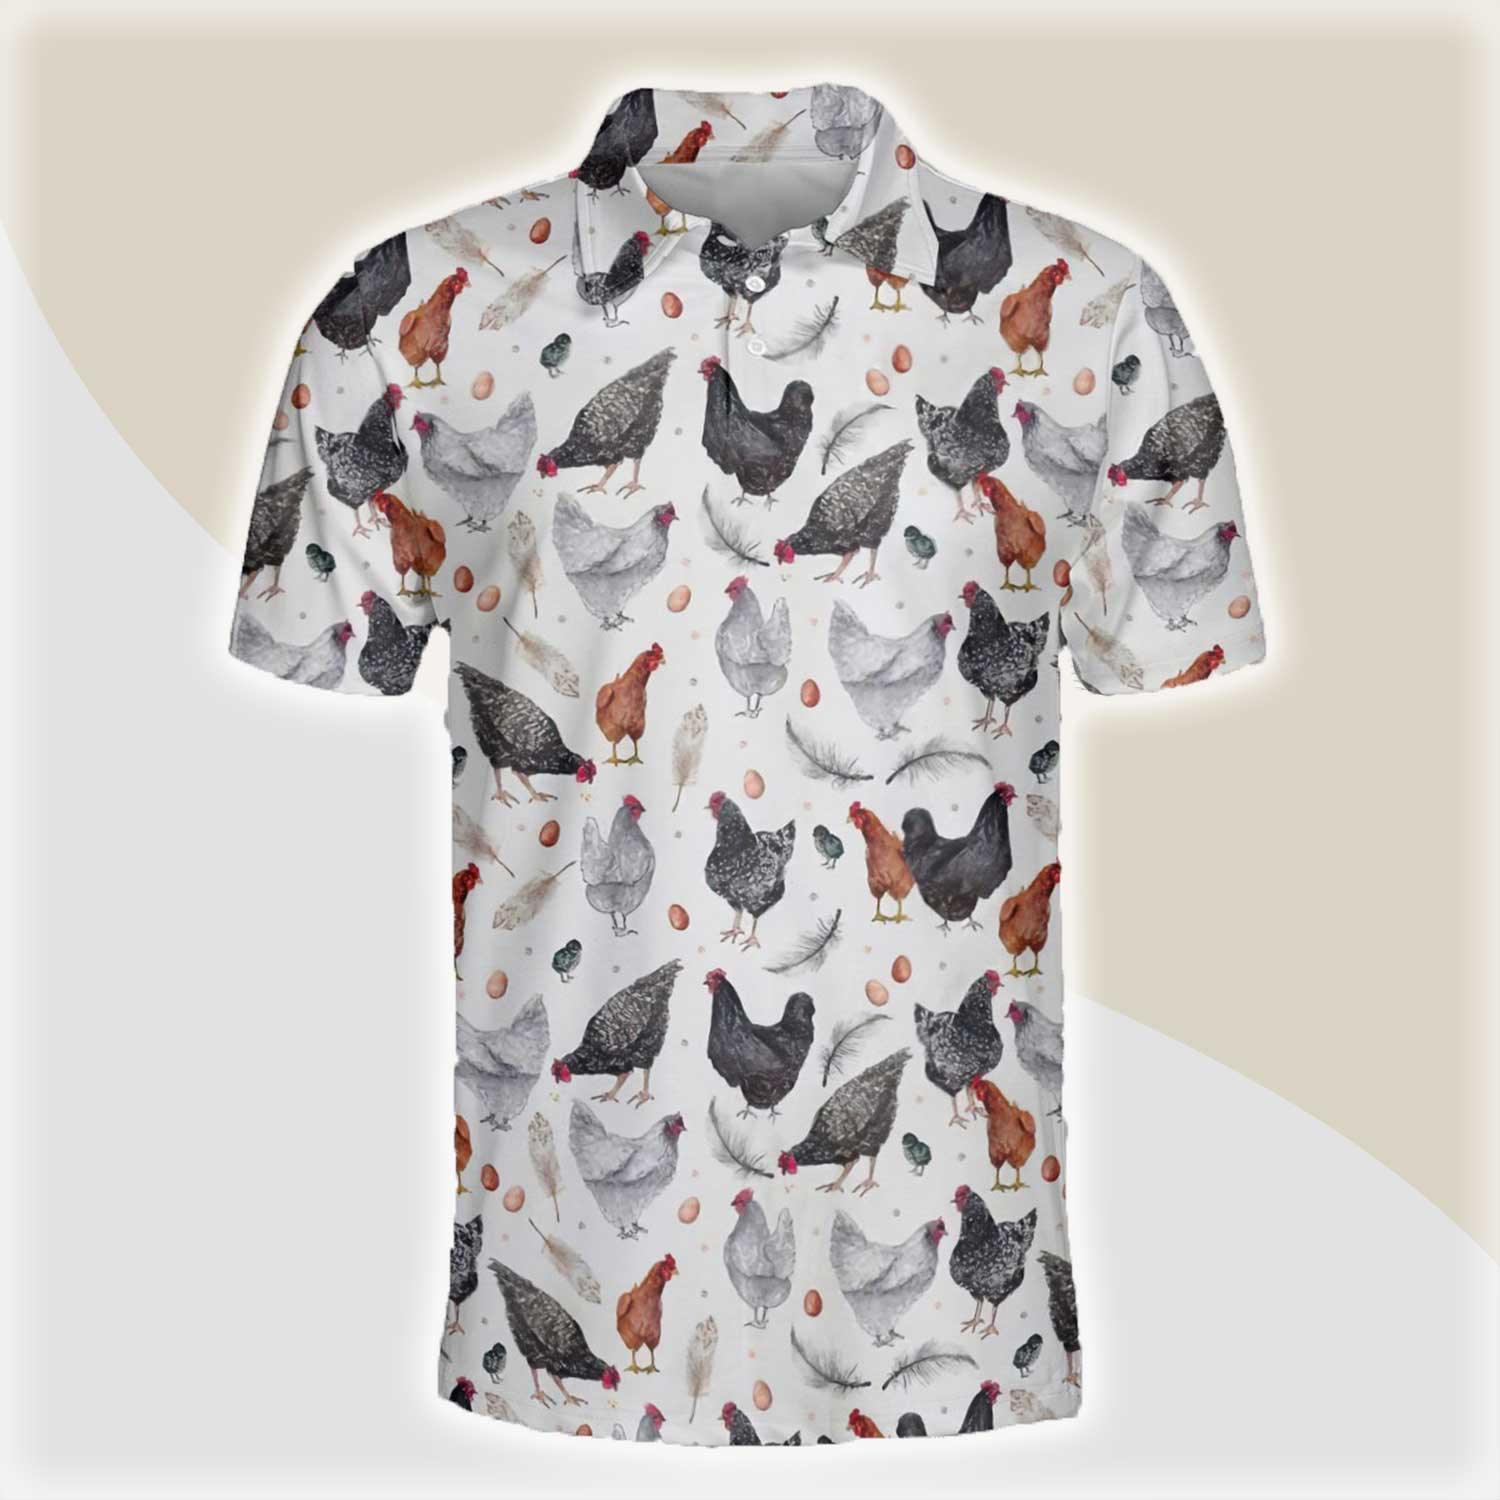 Chicken Men Polo Shirts - Chicken With Egg & Feathers Button Shirts For Men - Perfect Gift For Chicken Lovers, Animal Lovers - Amzanimalsgift